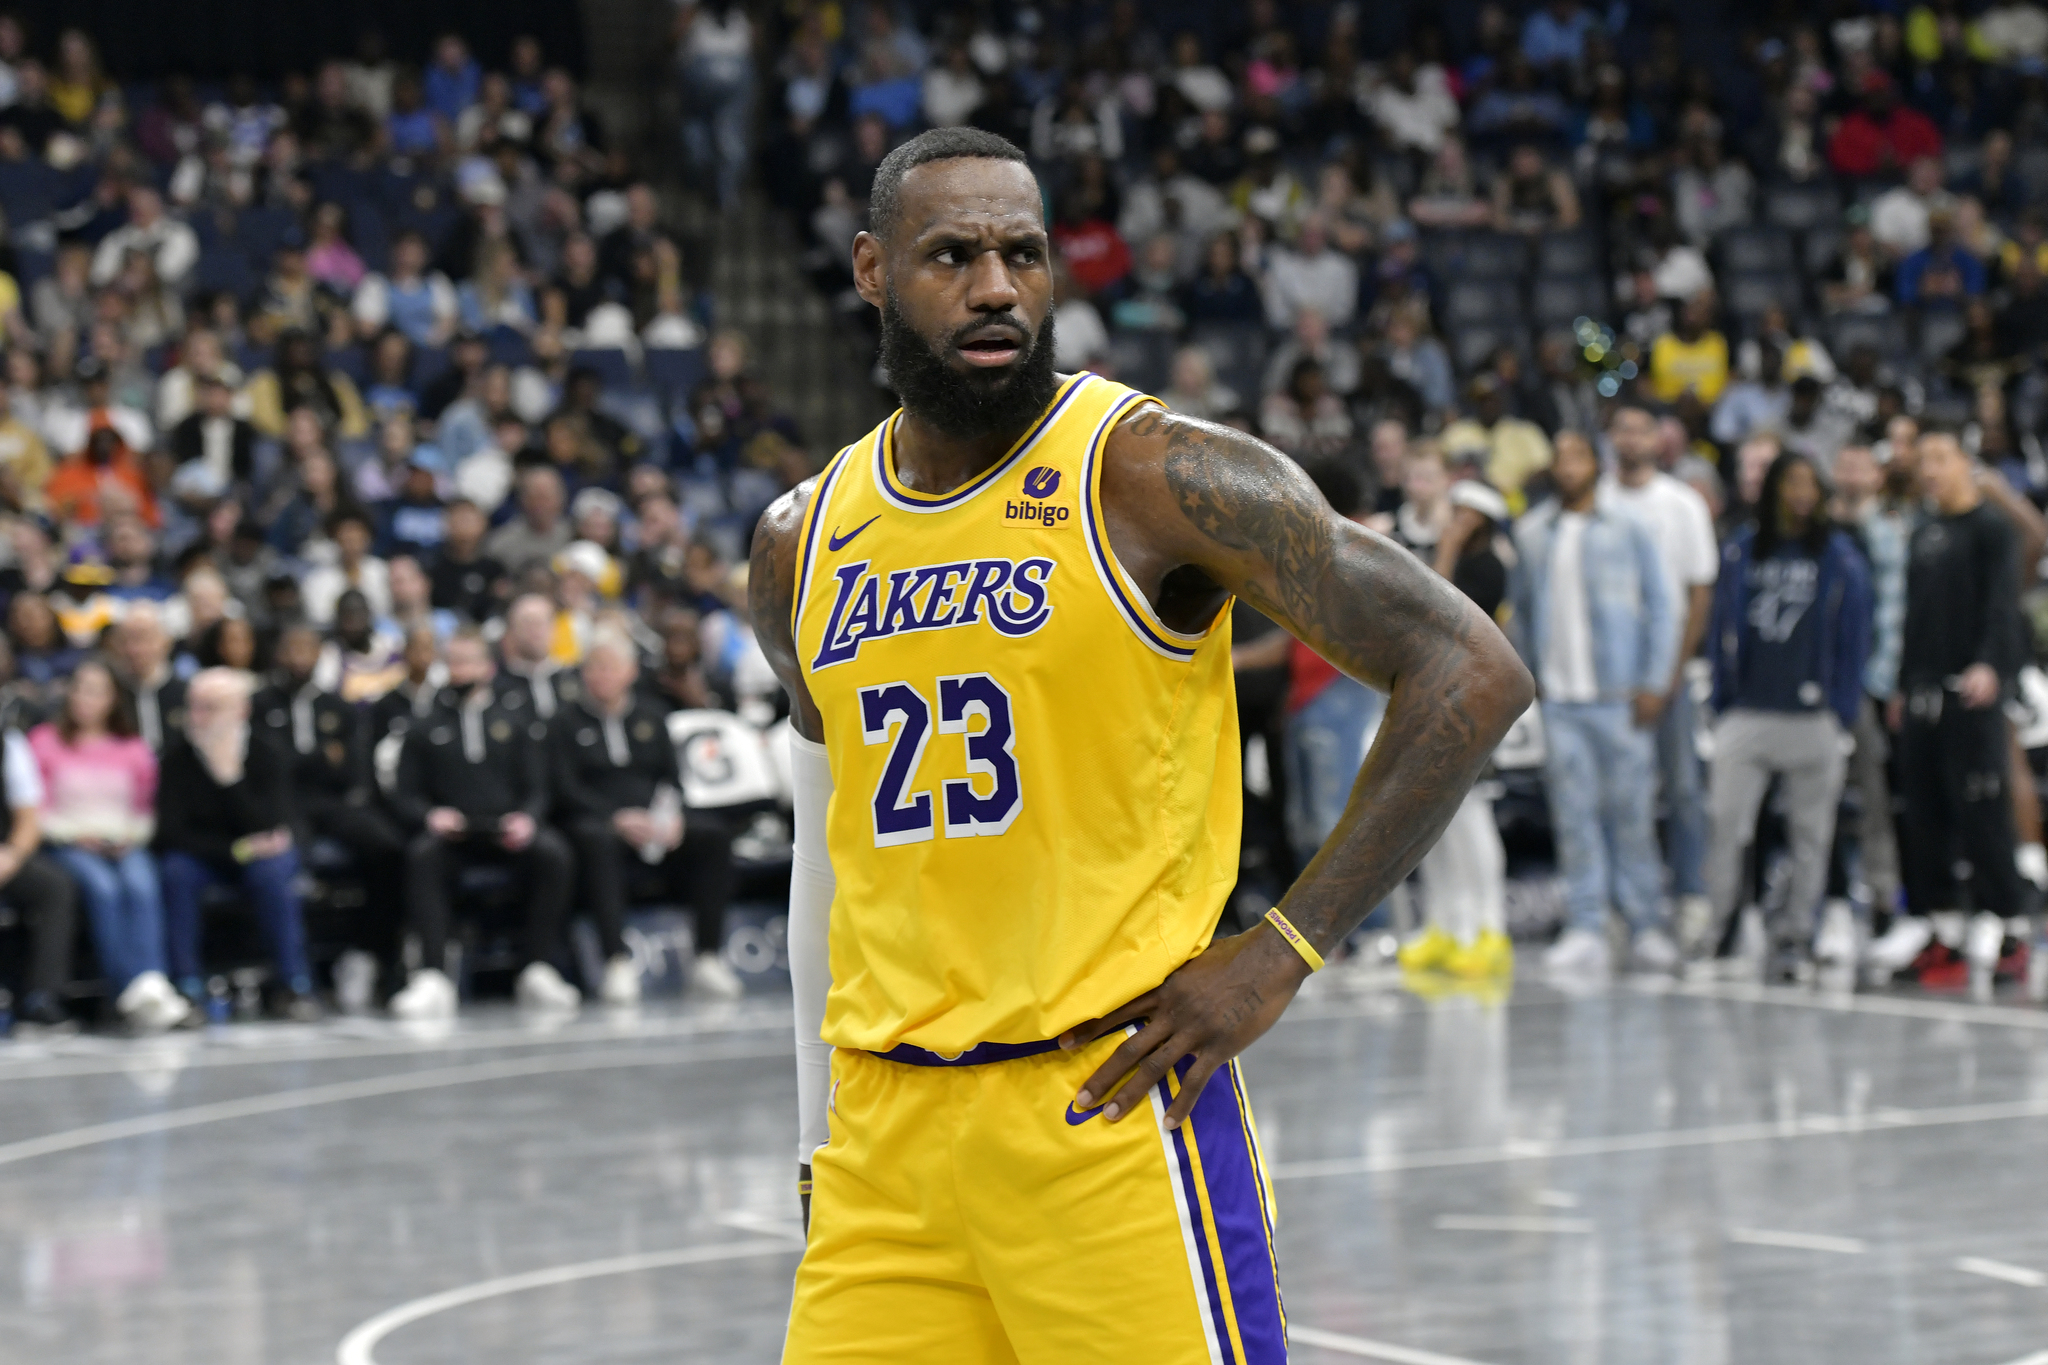 LeBron James received the visit of the bad luck before the NBA Playoffs